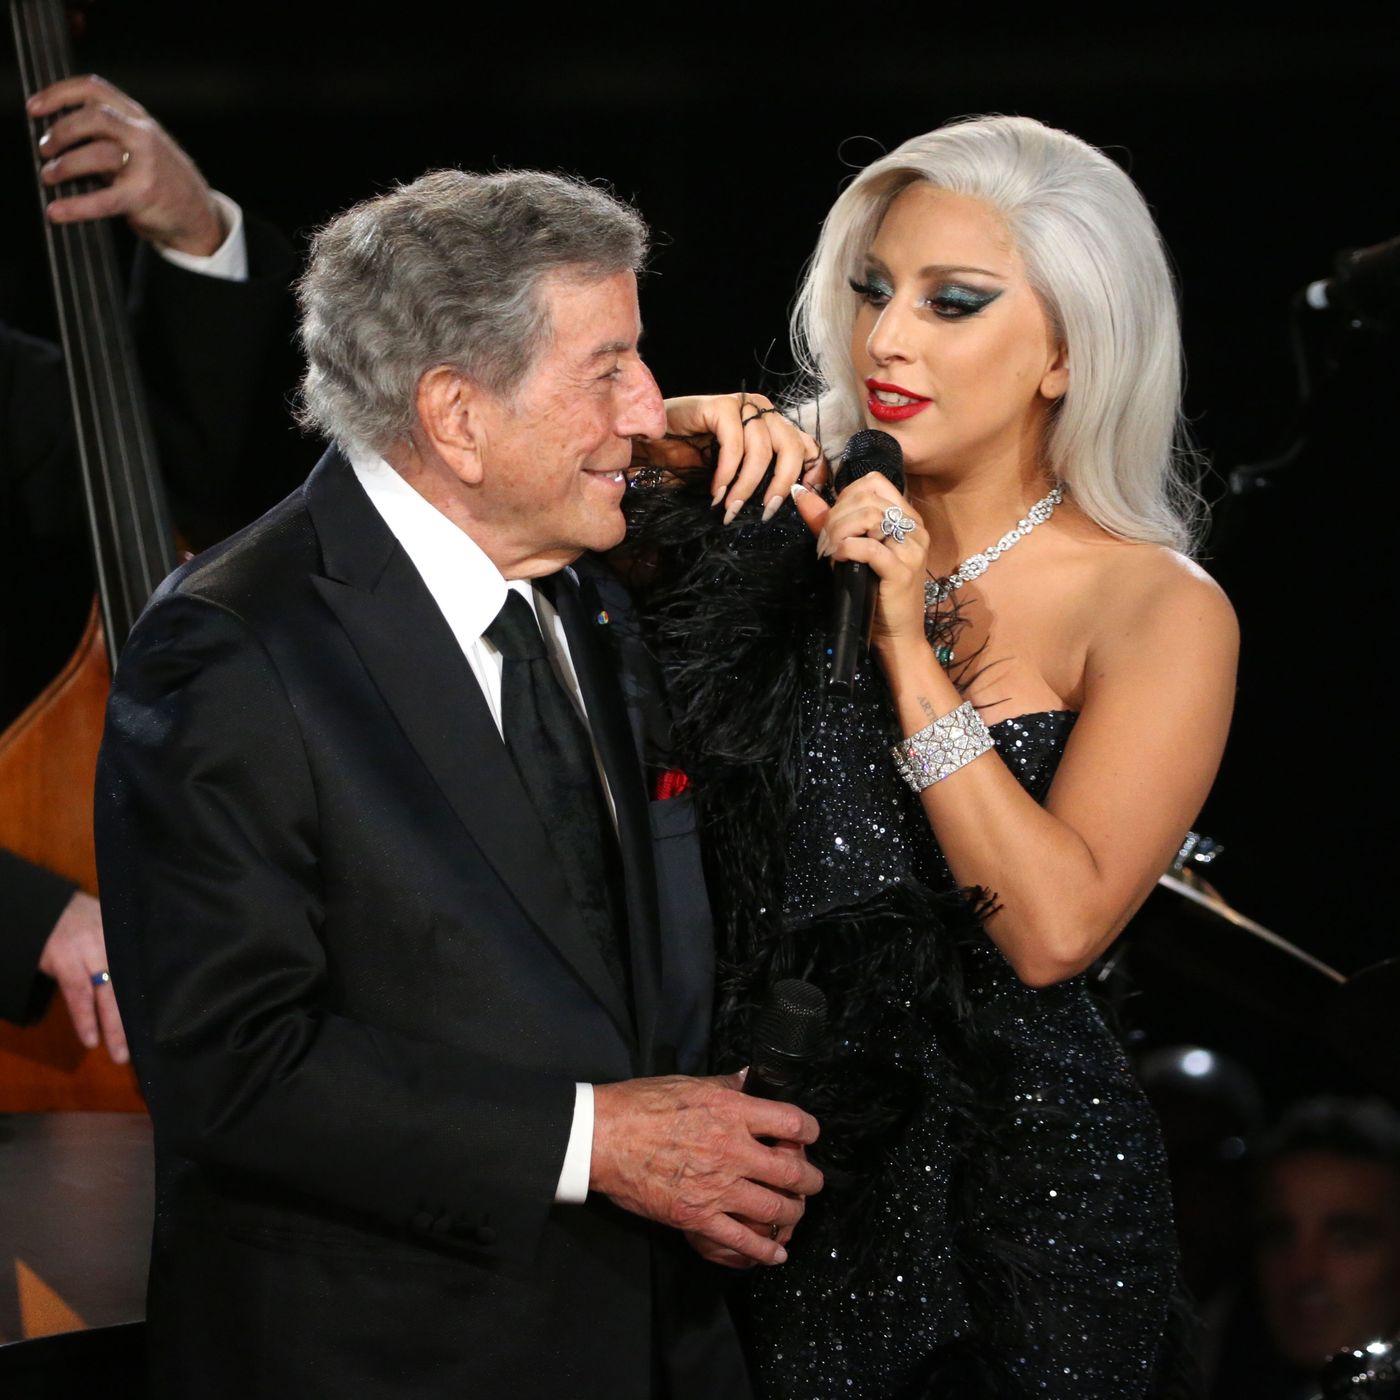 Lady Gaga Pays Tribute to Tony Bennett After His Death, lady gaga